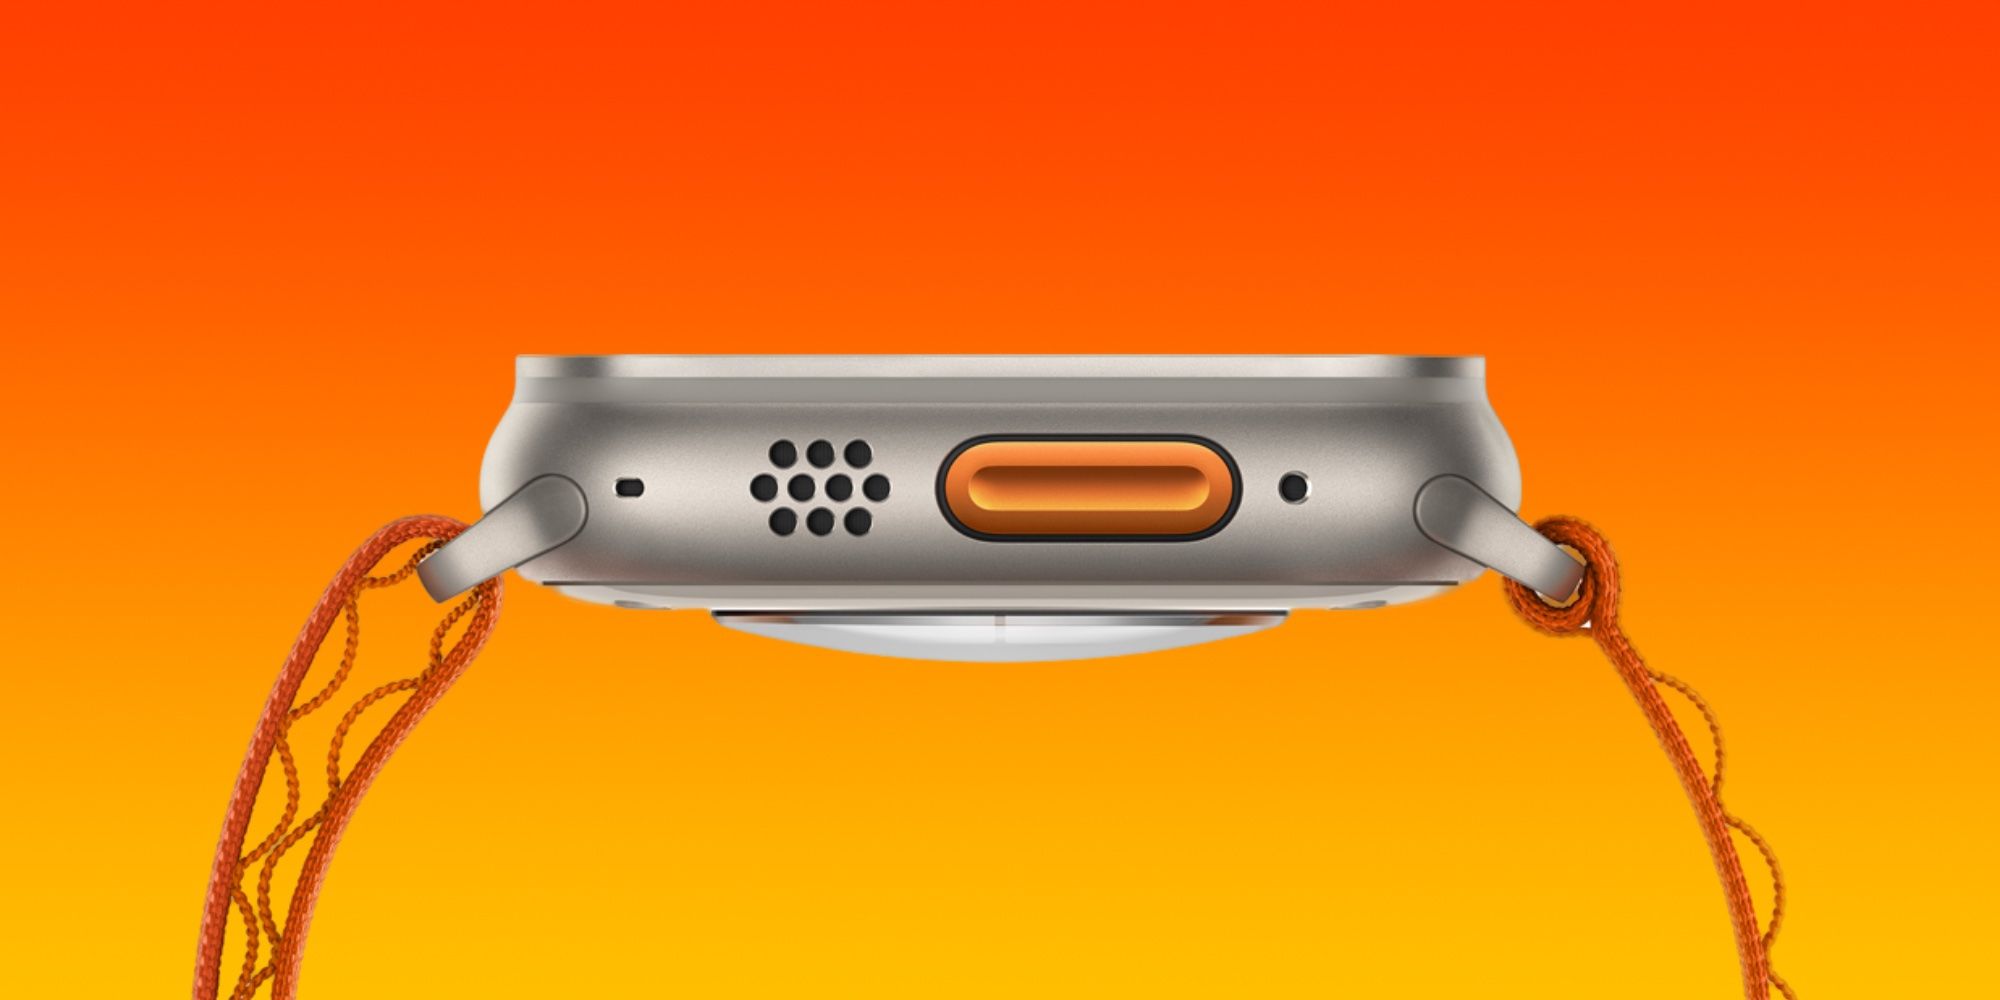 The side profile of the Apple Watch Ultra, showing off the international orange Action button.